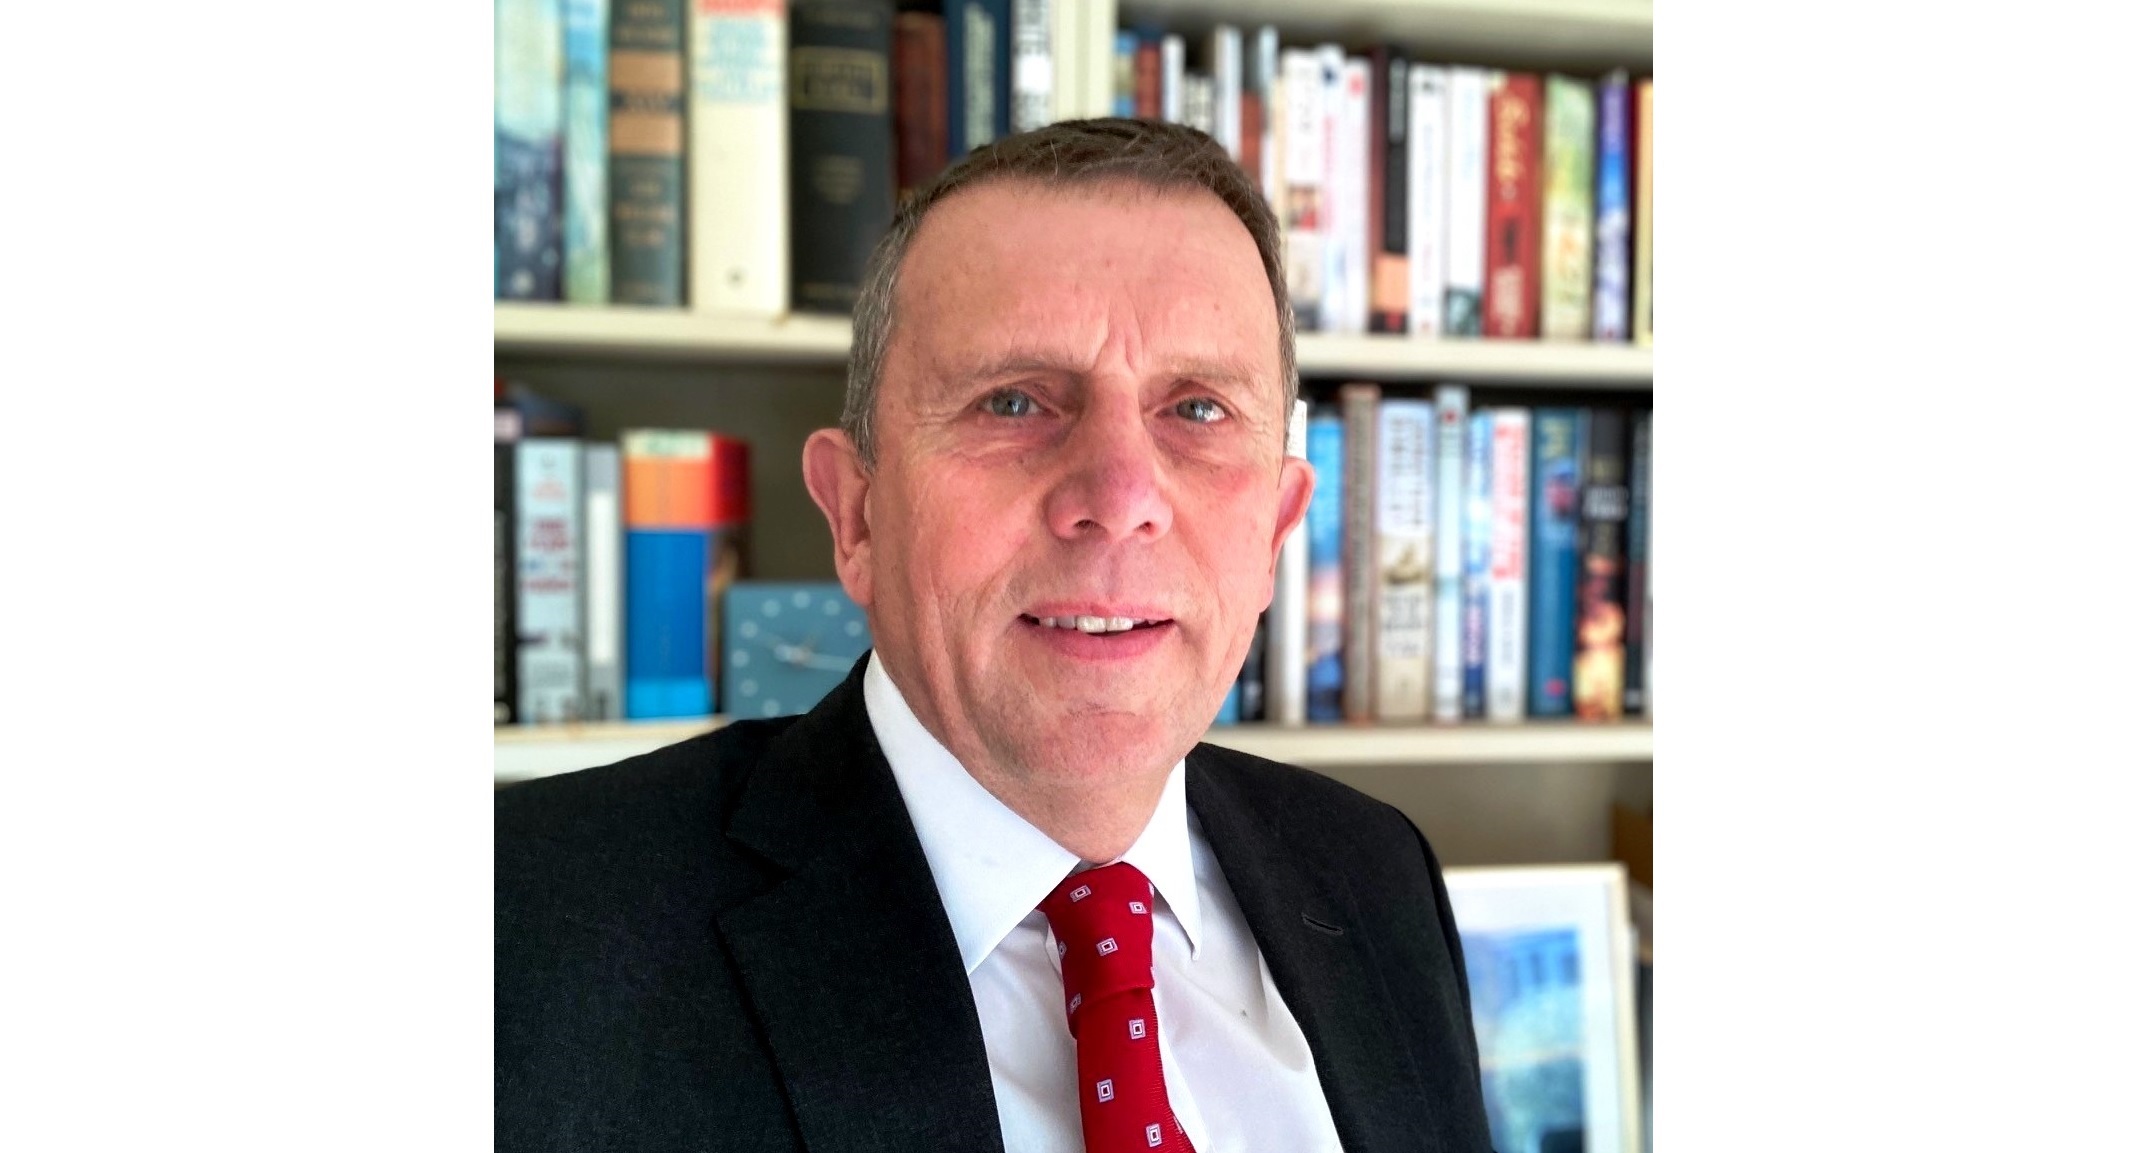   Major General (Ret’d) David Shouesmith BEd, MBA, FCILT, Director of Universal Defence and Security Solutions, will speak on a panel as DSEI 2023.